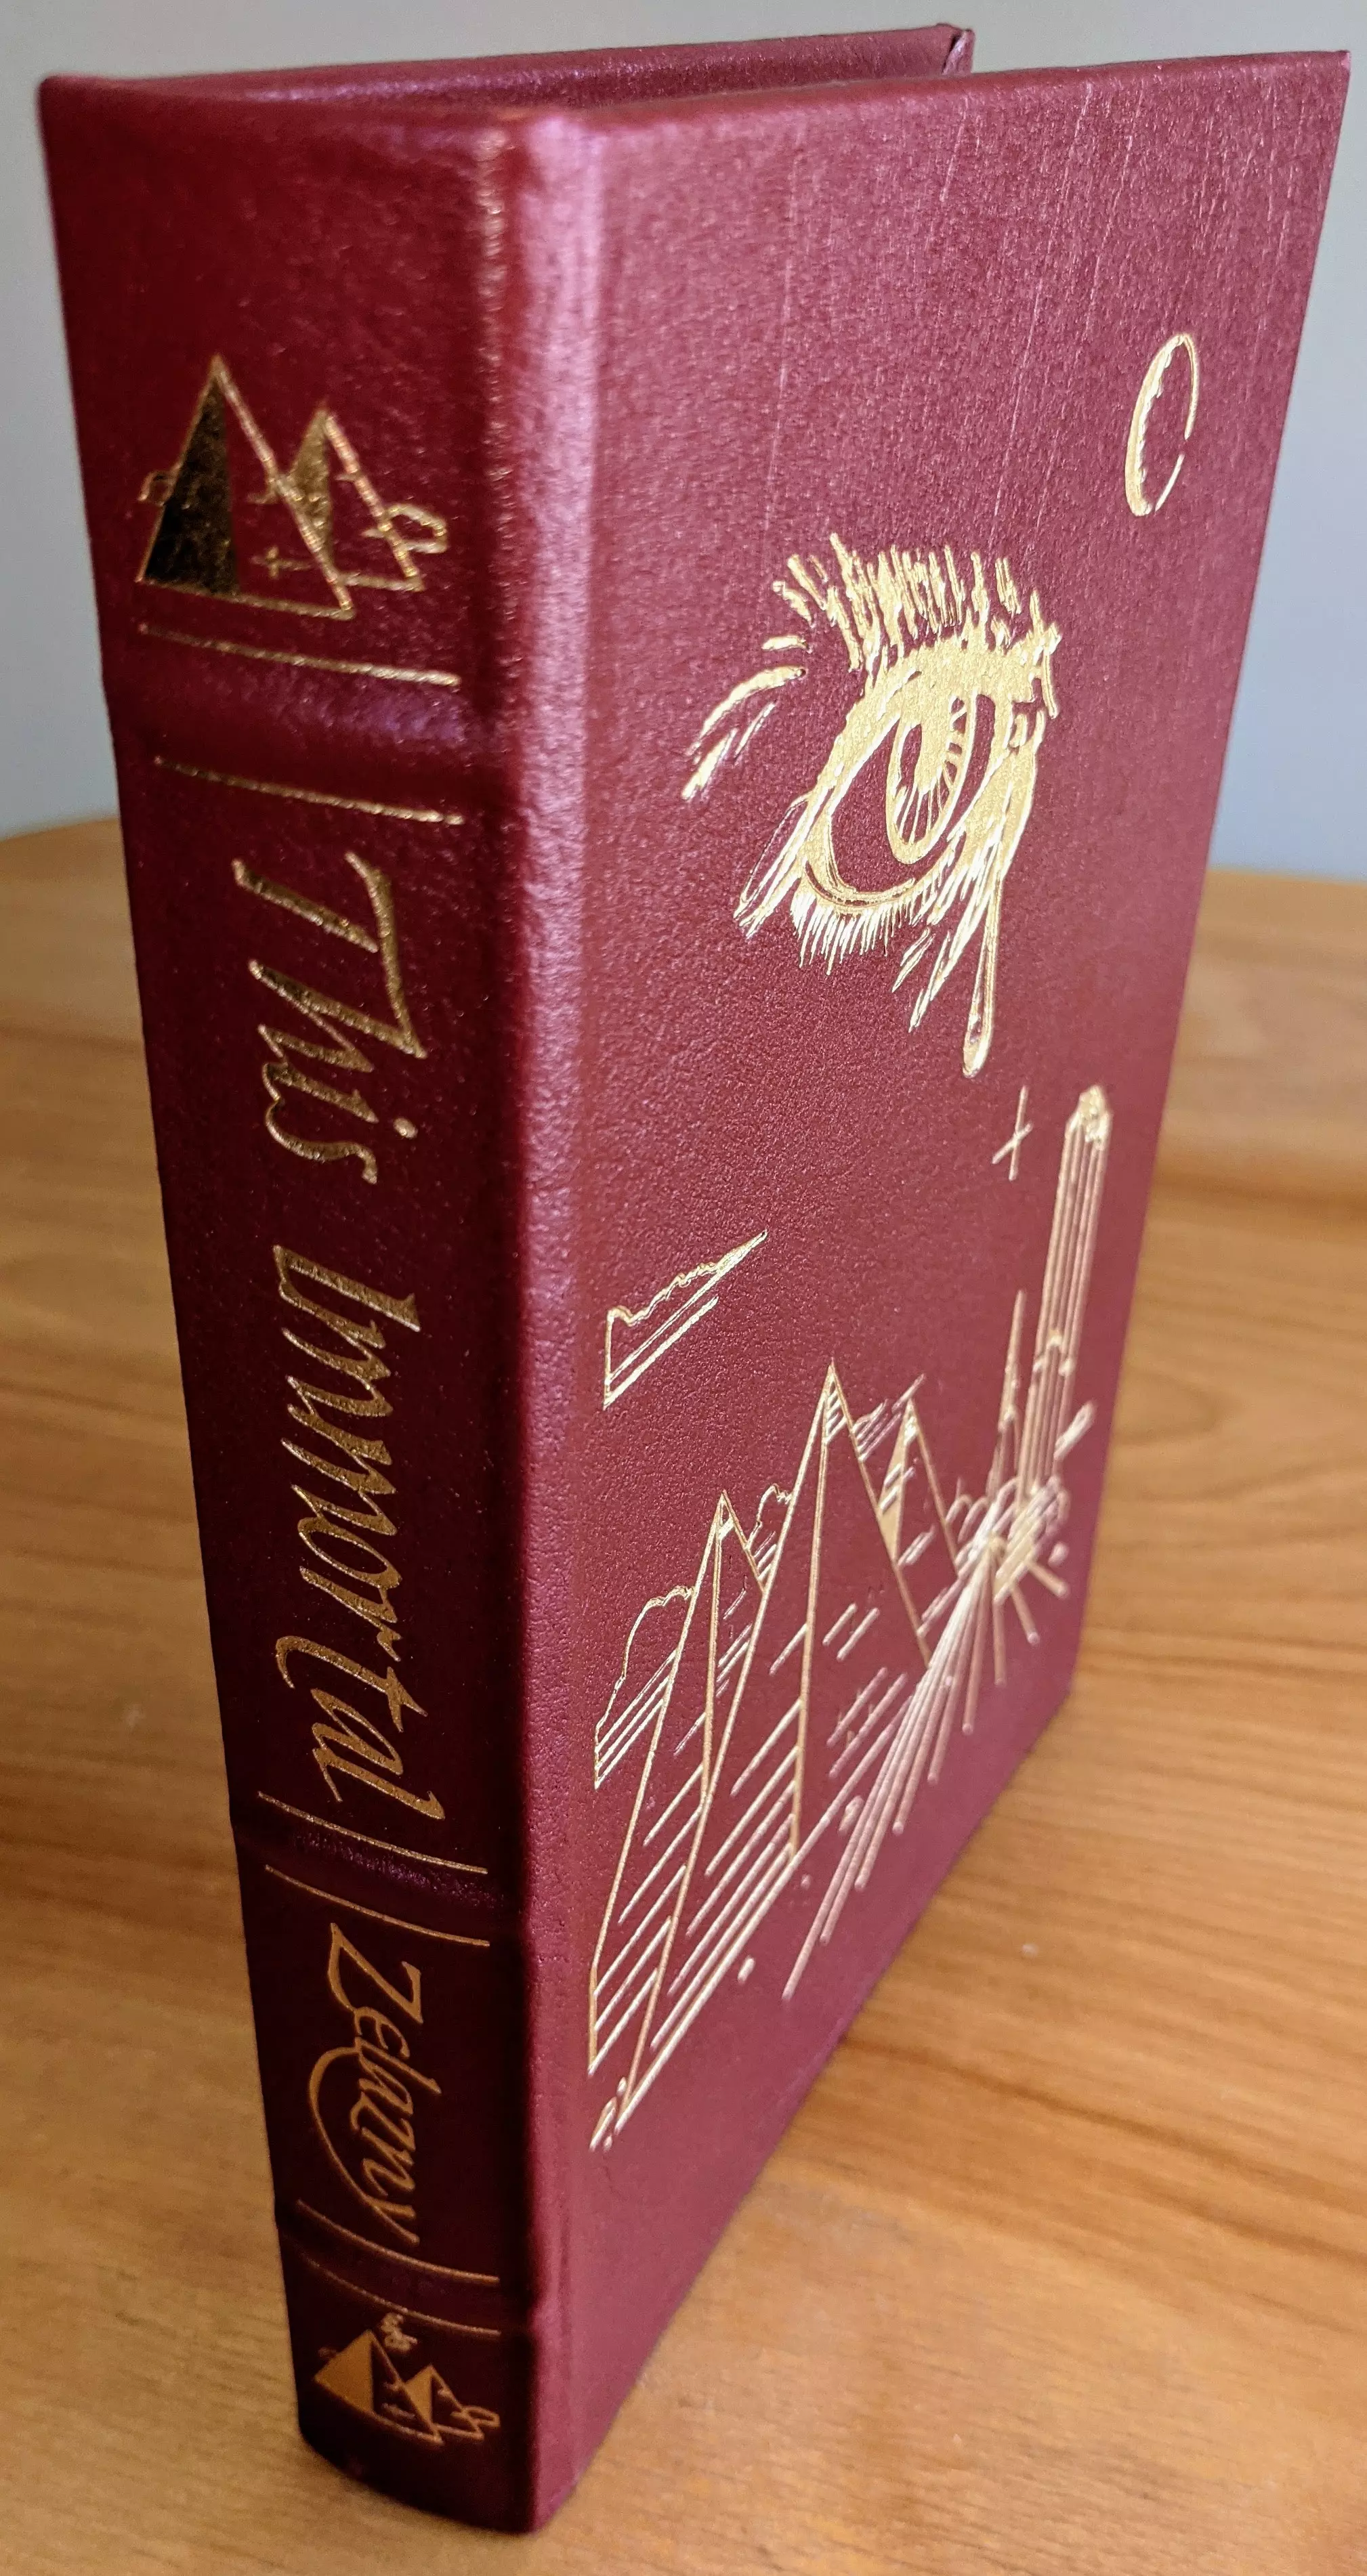 Stunning Red Leather Bound hardback book with hubbed spine, cover artwork in 22kt gold, printed on archival paper with gold gilded edges, smyth sewing & concealed muslin joints
	  - original artwork by Vincent DiFate